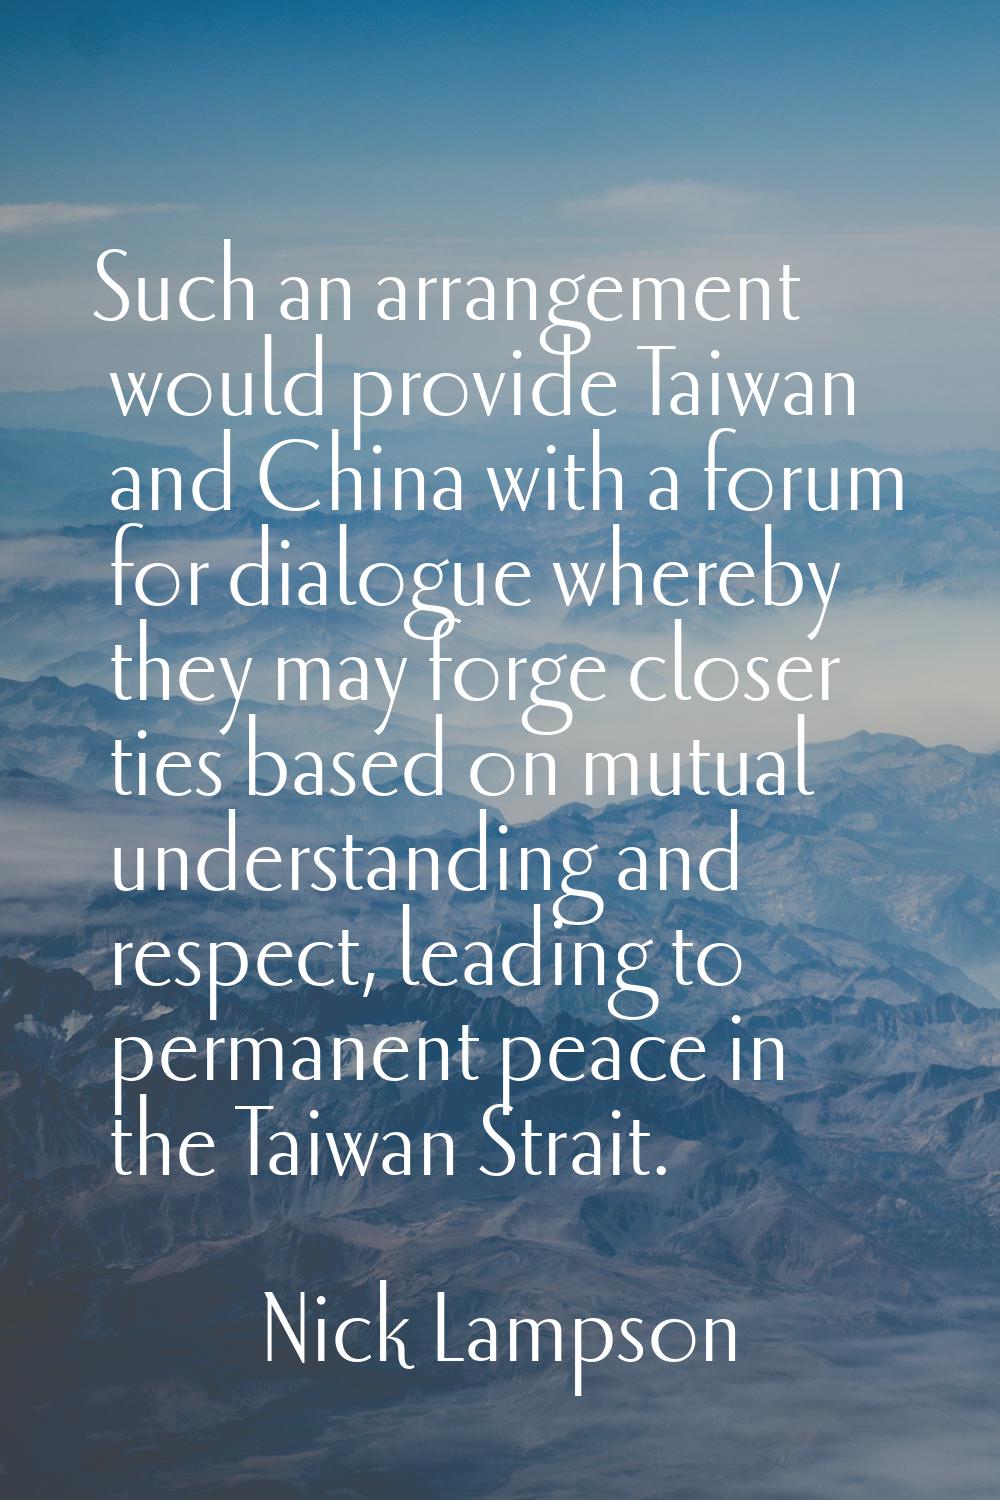 Such an arrangement would provide Taiwan and China with a forum for dialogue whereby they may forge